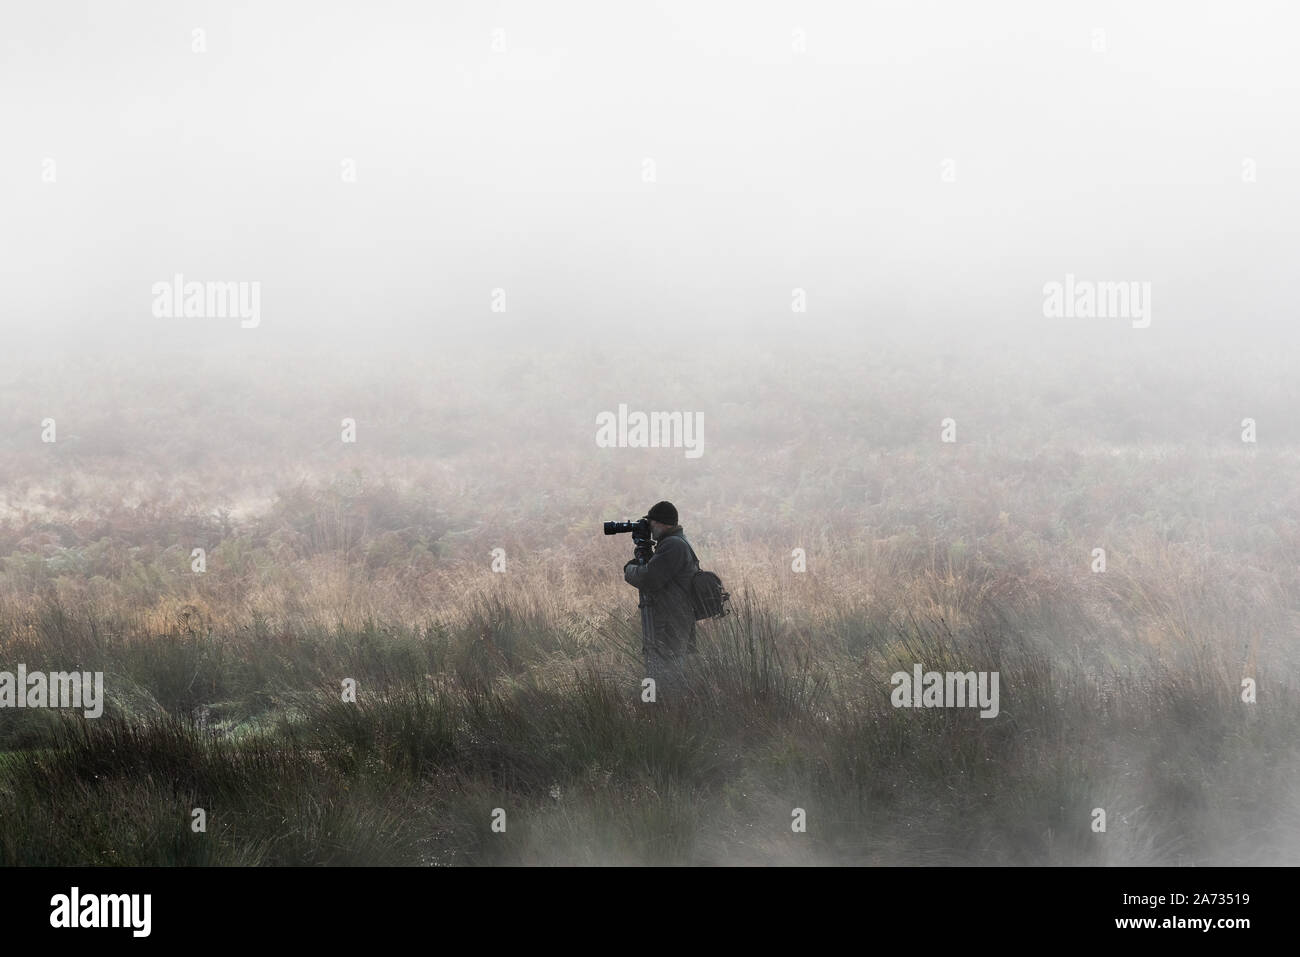 UK Weather: A photographer looks for wildlife images during an early misty morning in central Richmond Park. London, UK. Stock Photo